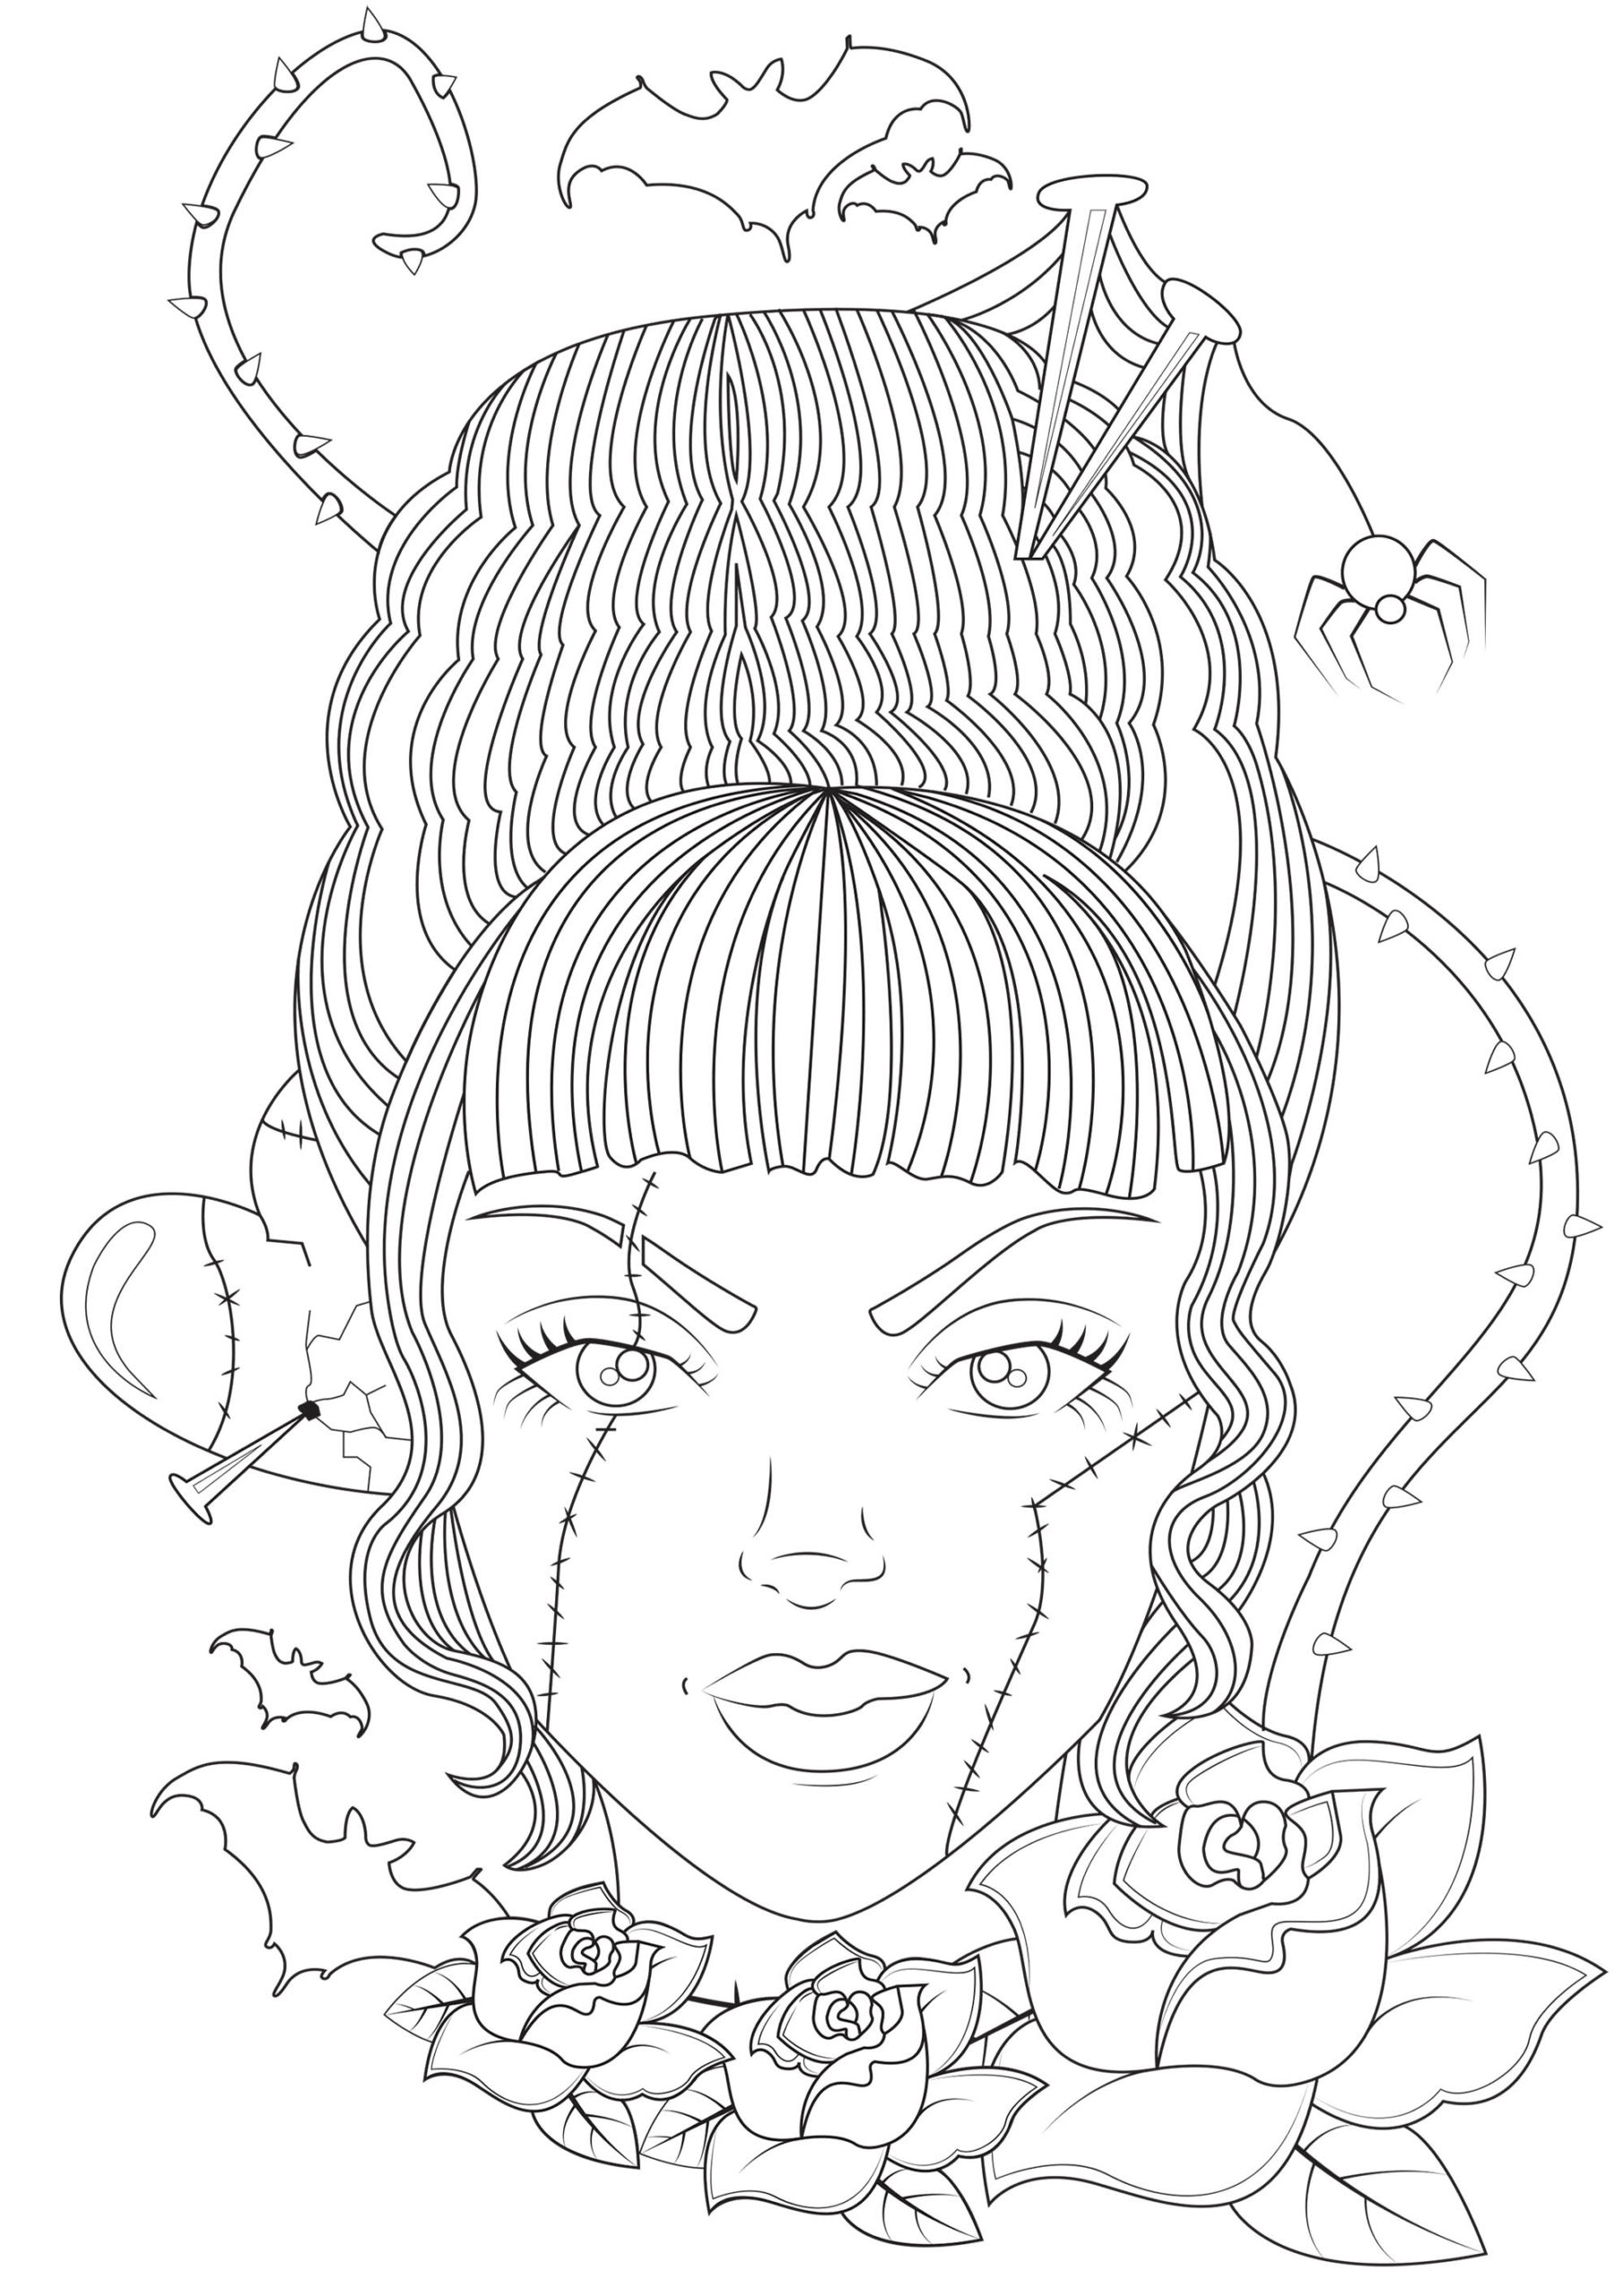 The Bride of Frankenstein | halloween coloring pages for adults easy | horror coloring pages